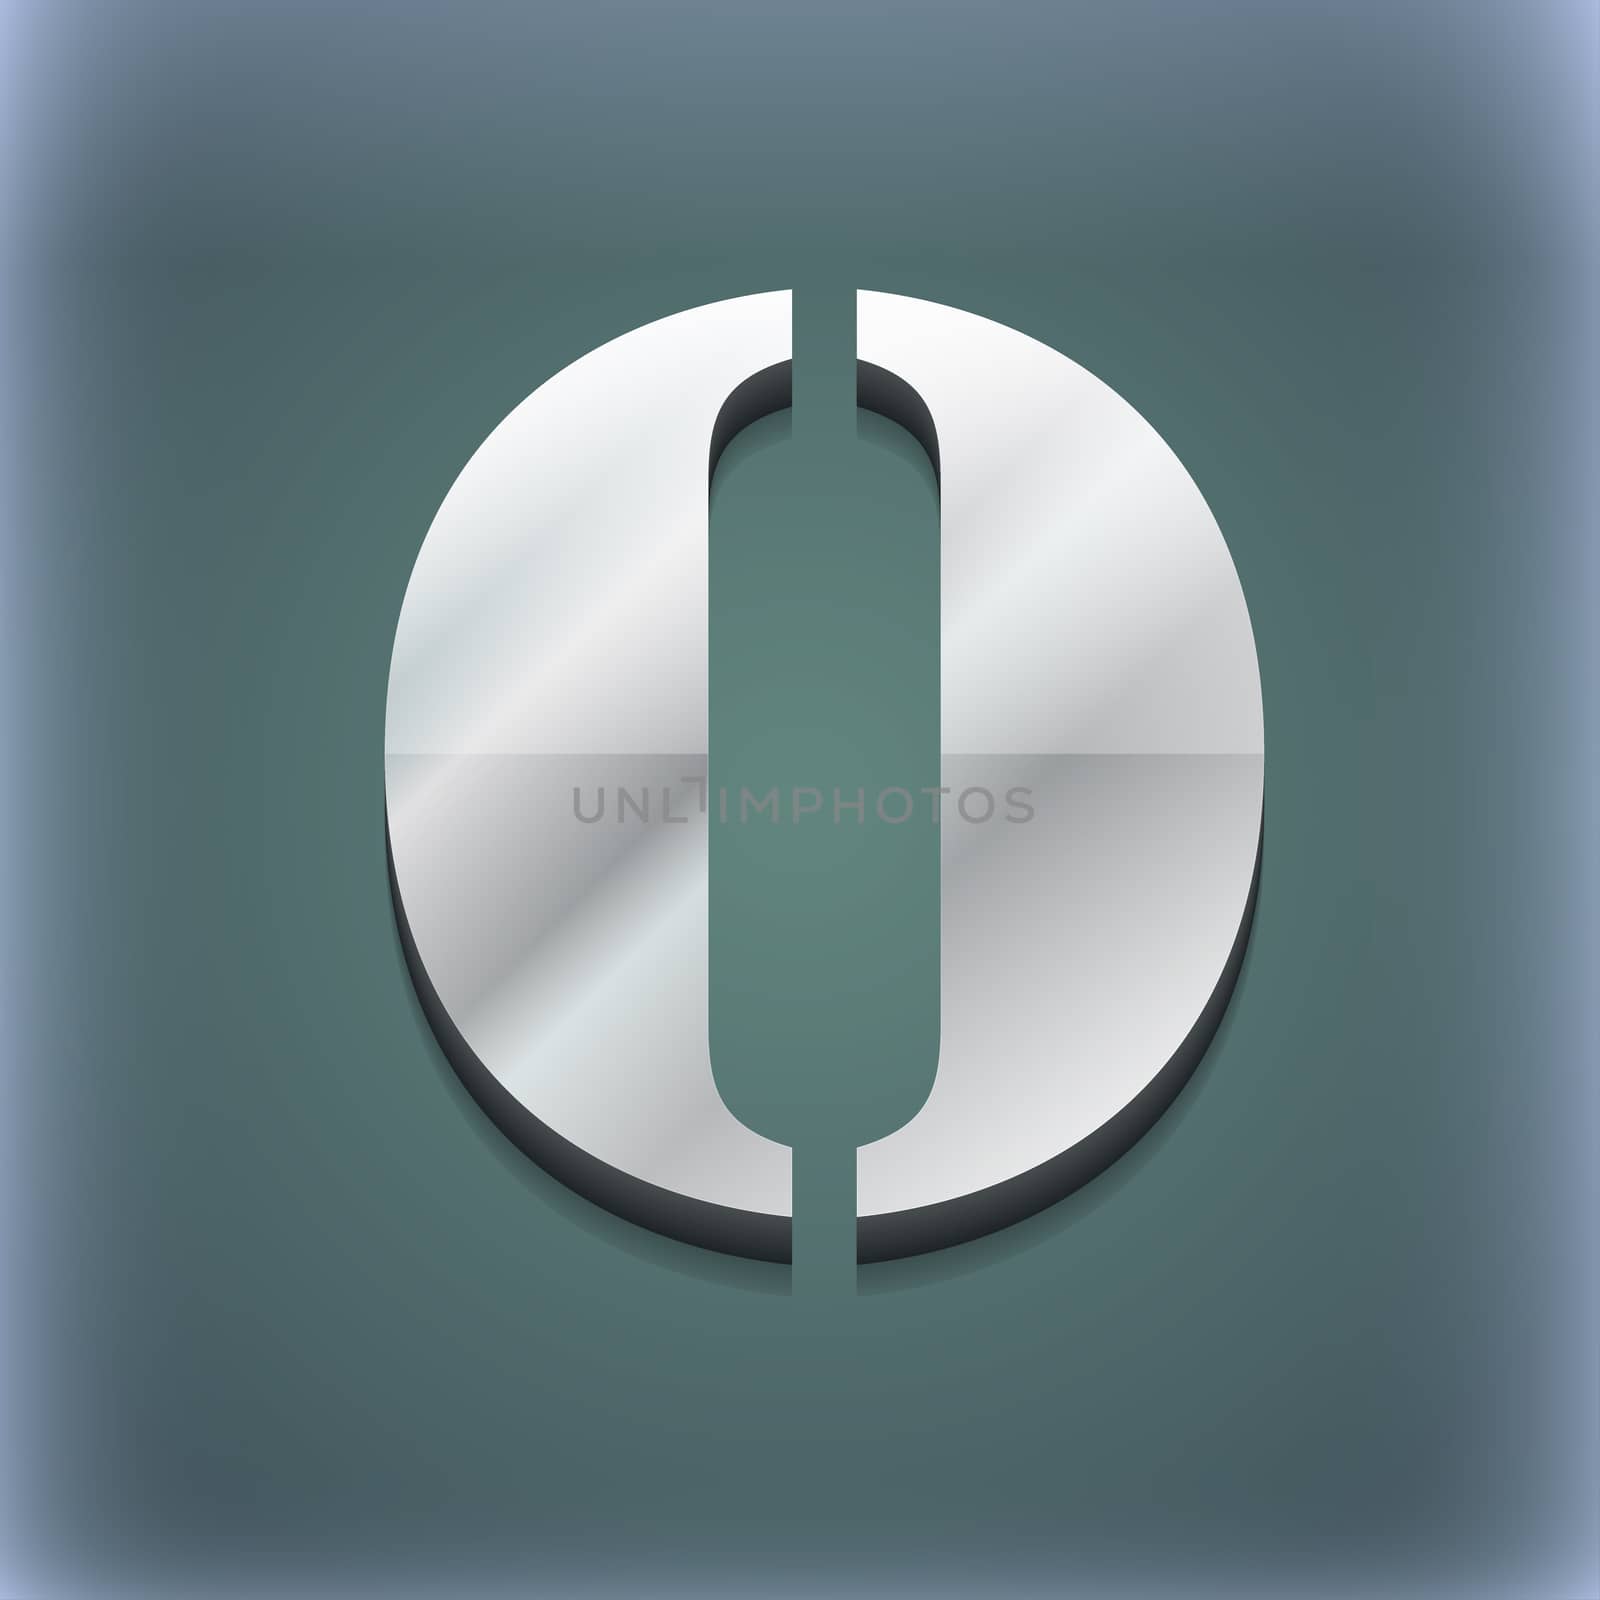 number zero icon symbol. 3D style. Trendy, modern design with space for your text illustration. Raster version